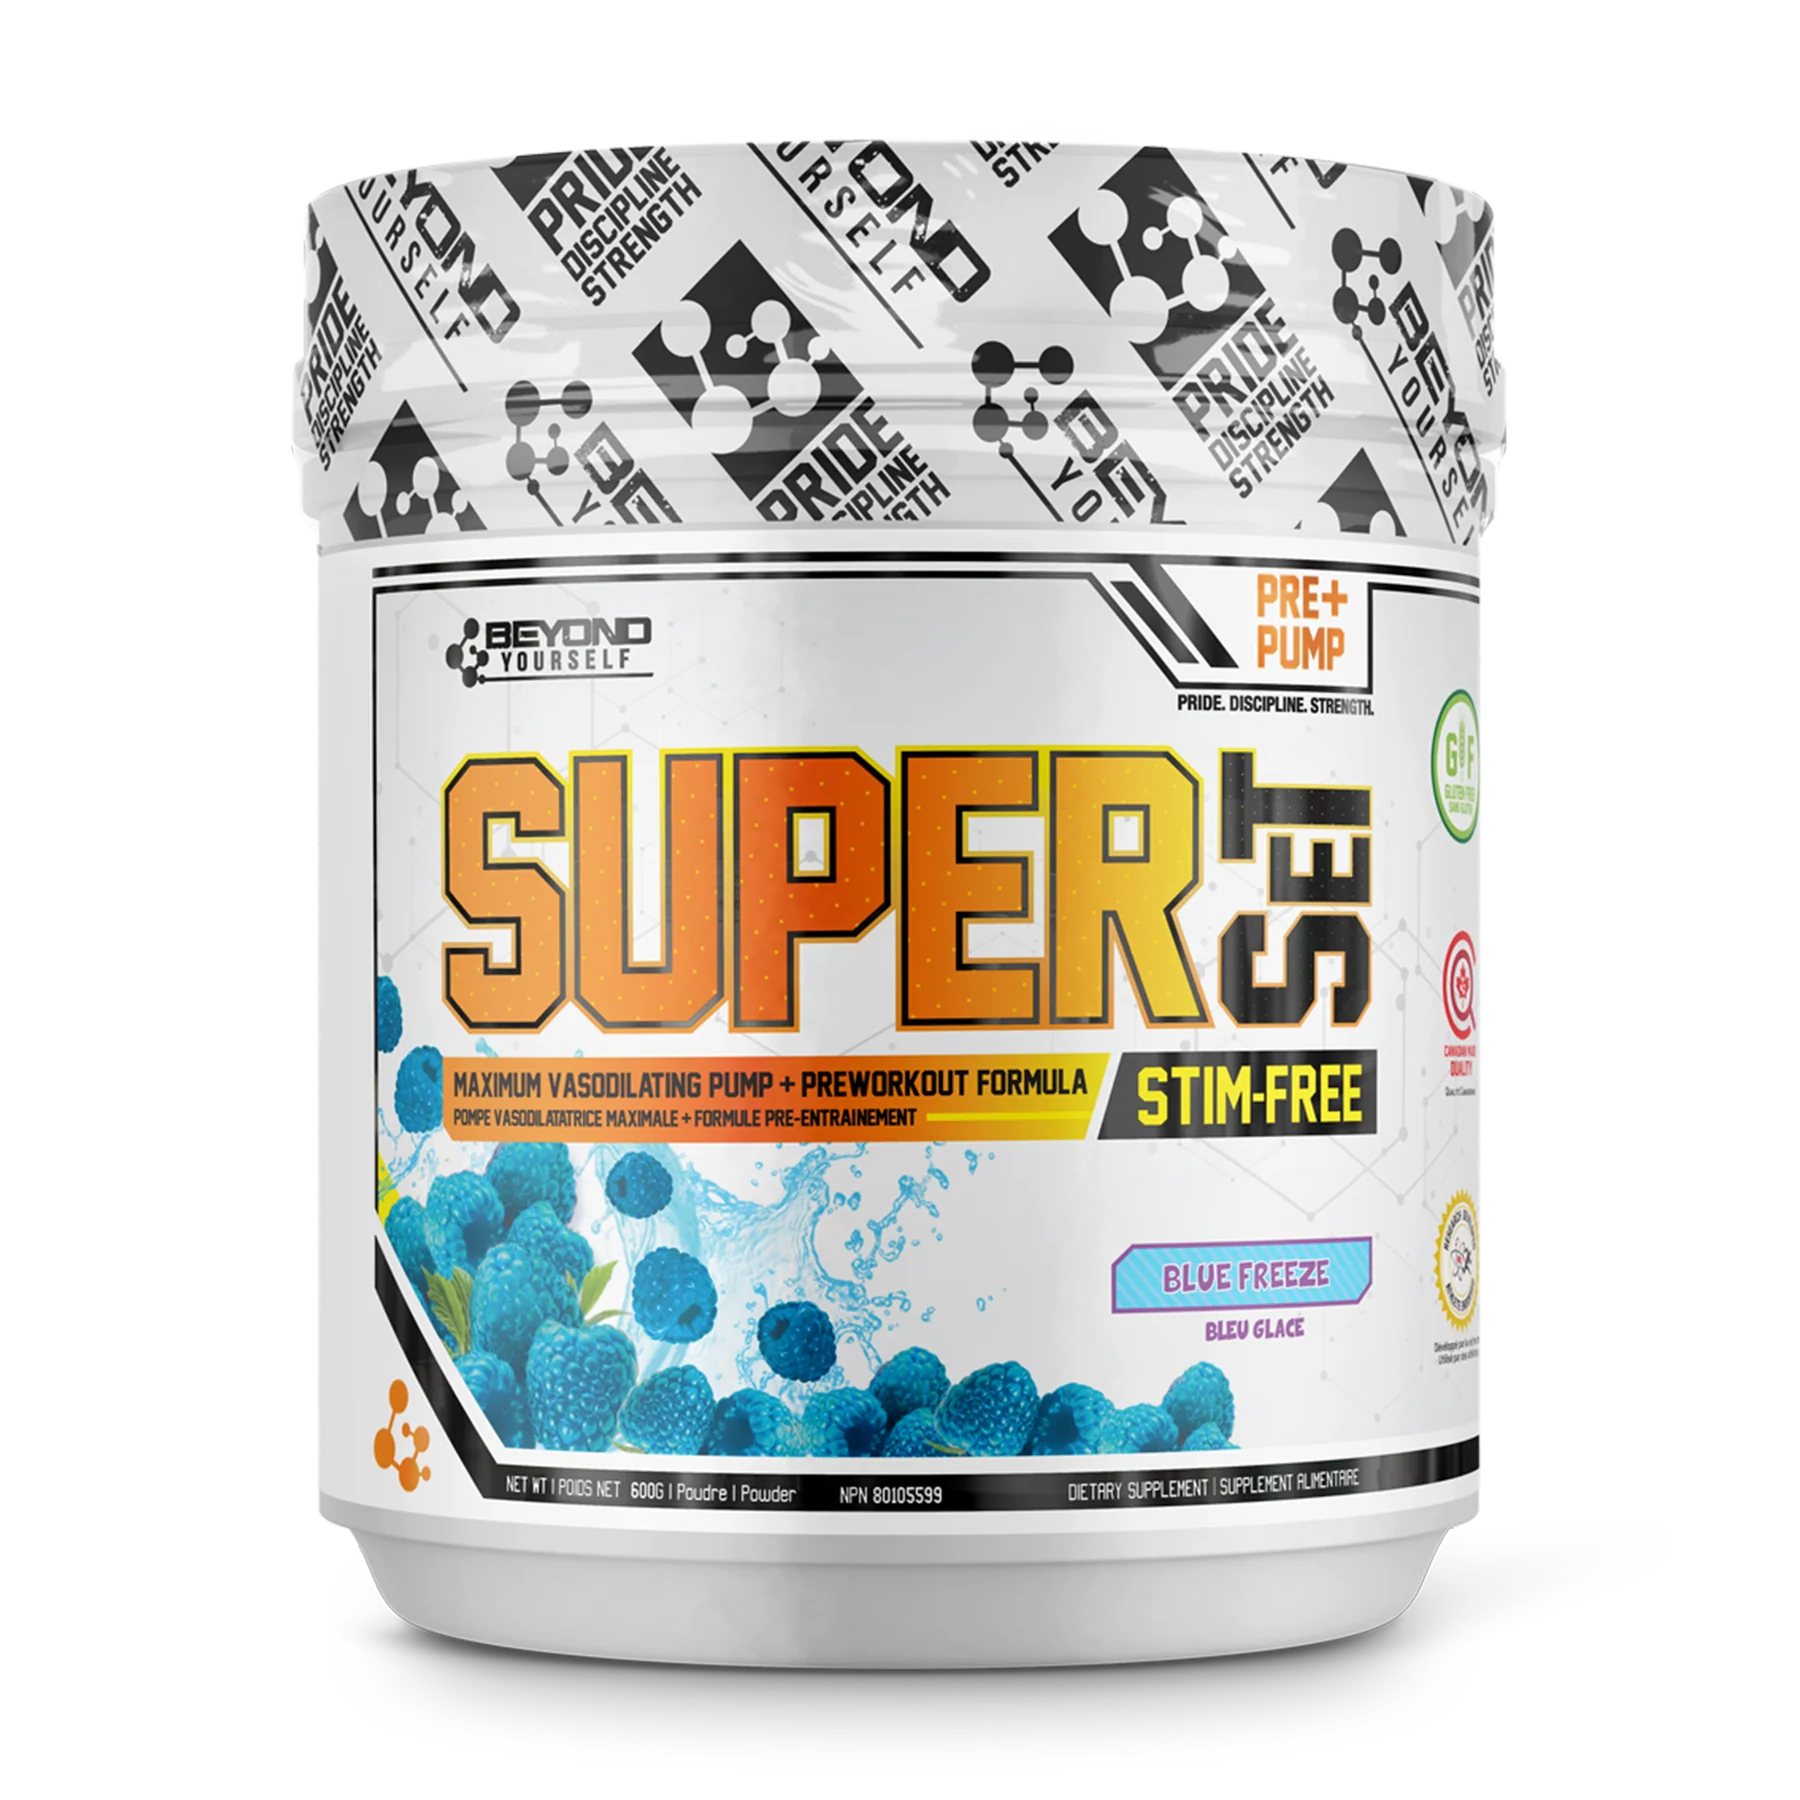 Beyond Yourself Superset Pre-Workout Stim Free (No Caffeine) 40 Servings